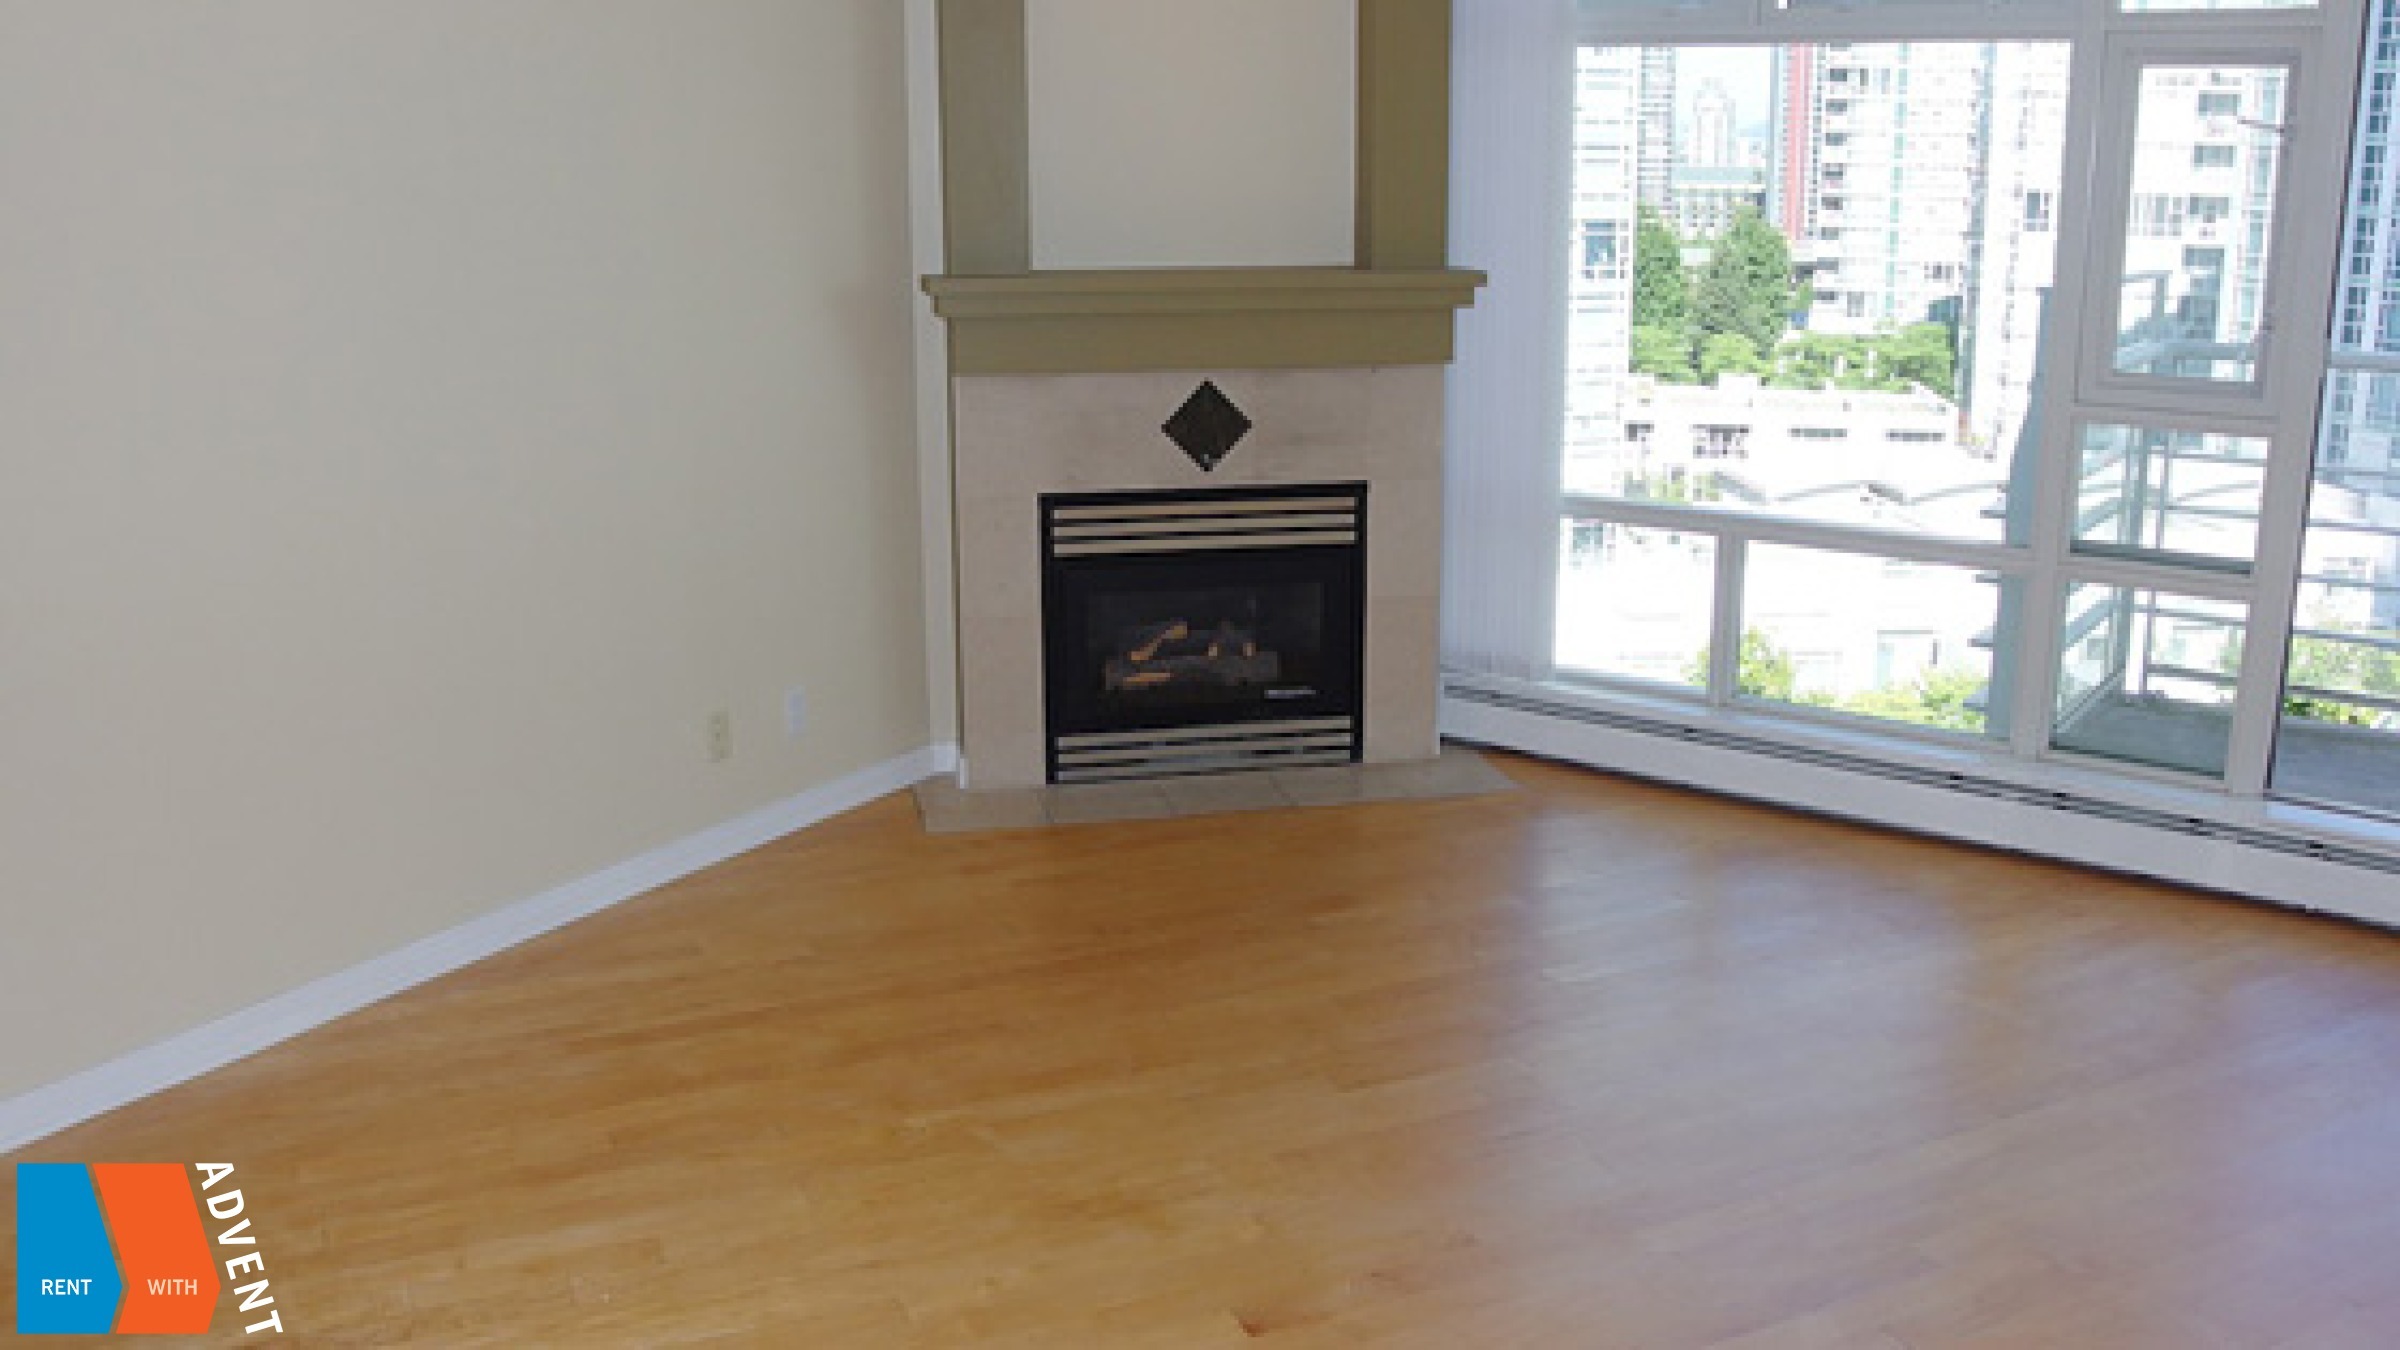 Aquarius lll Luxury 2 Bedroom Unfurnished Apartment For Rent in Yaletown. 1006 - 189 Davie Street, Vancouver, BC, Canada.